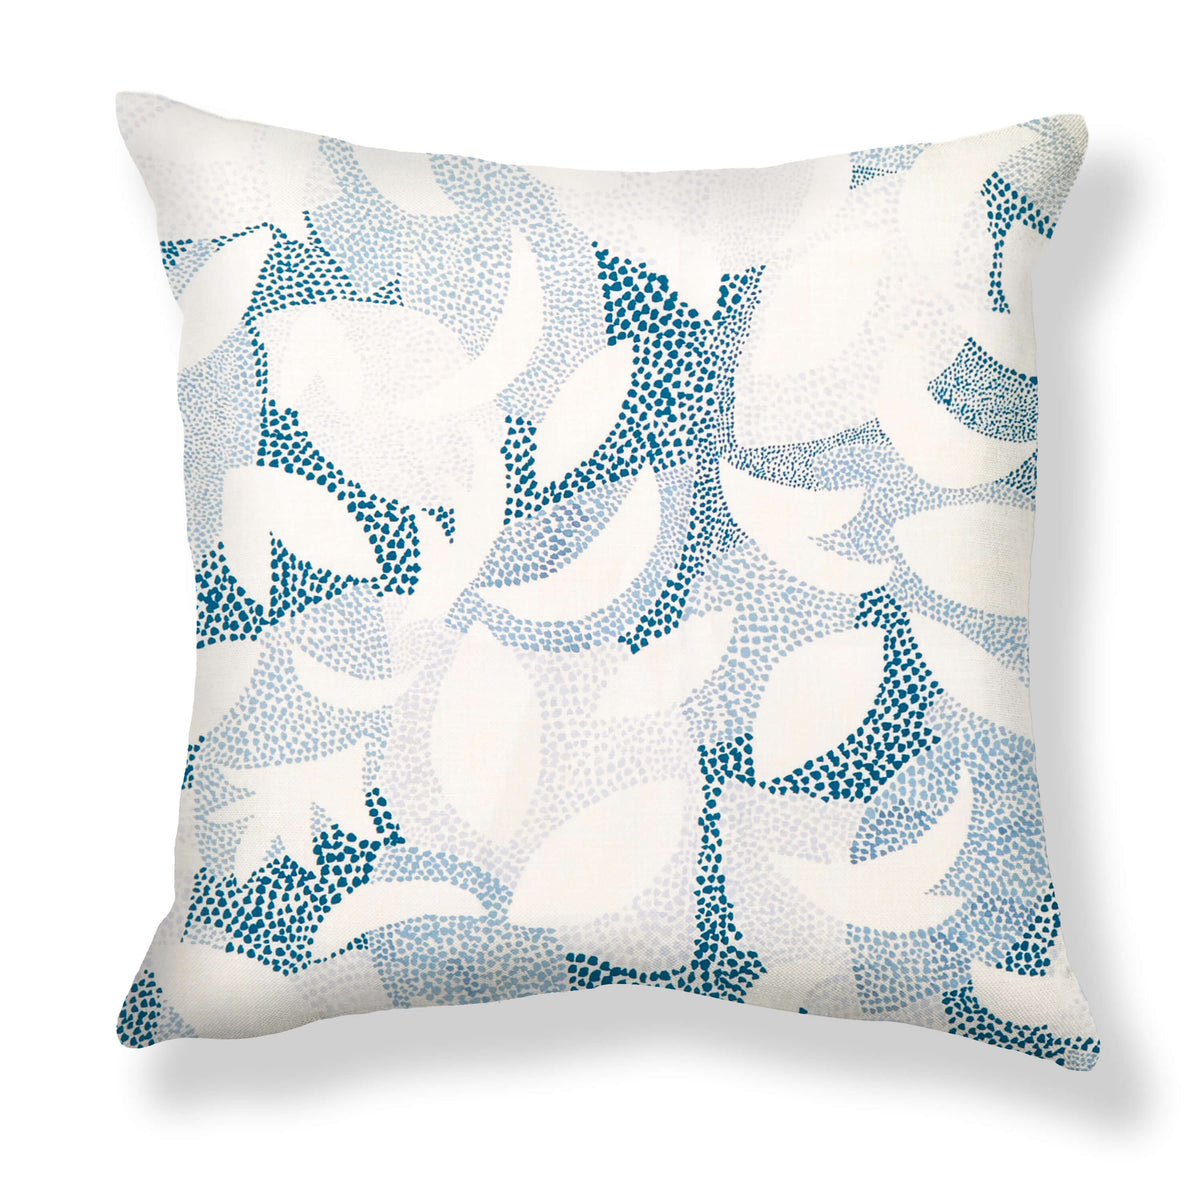 Dotted Leaves Pillow in Ocean Blues